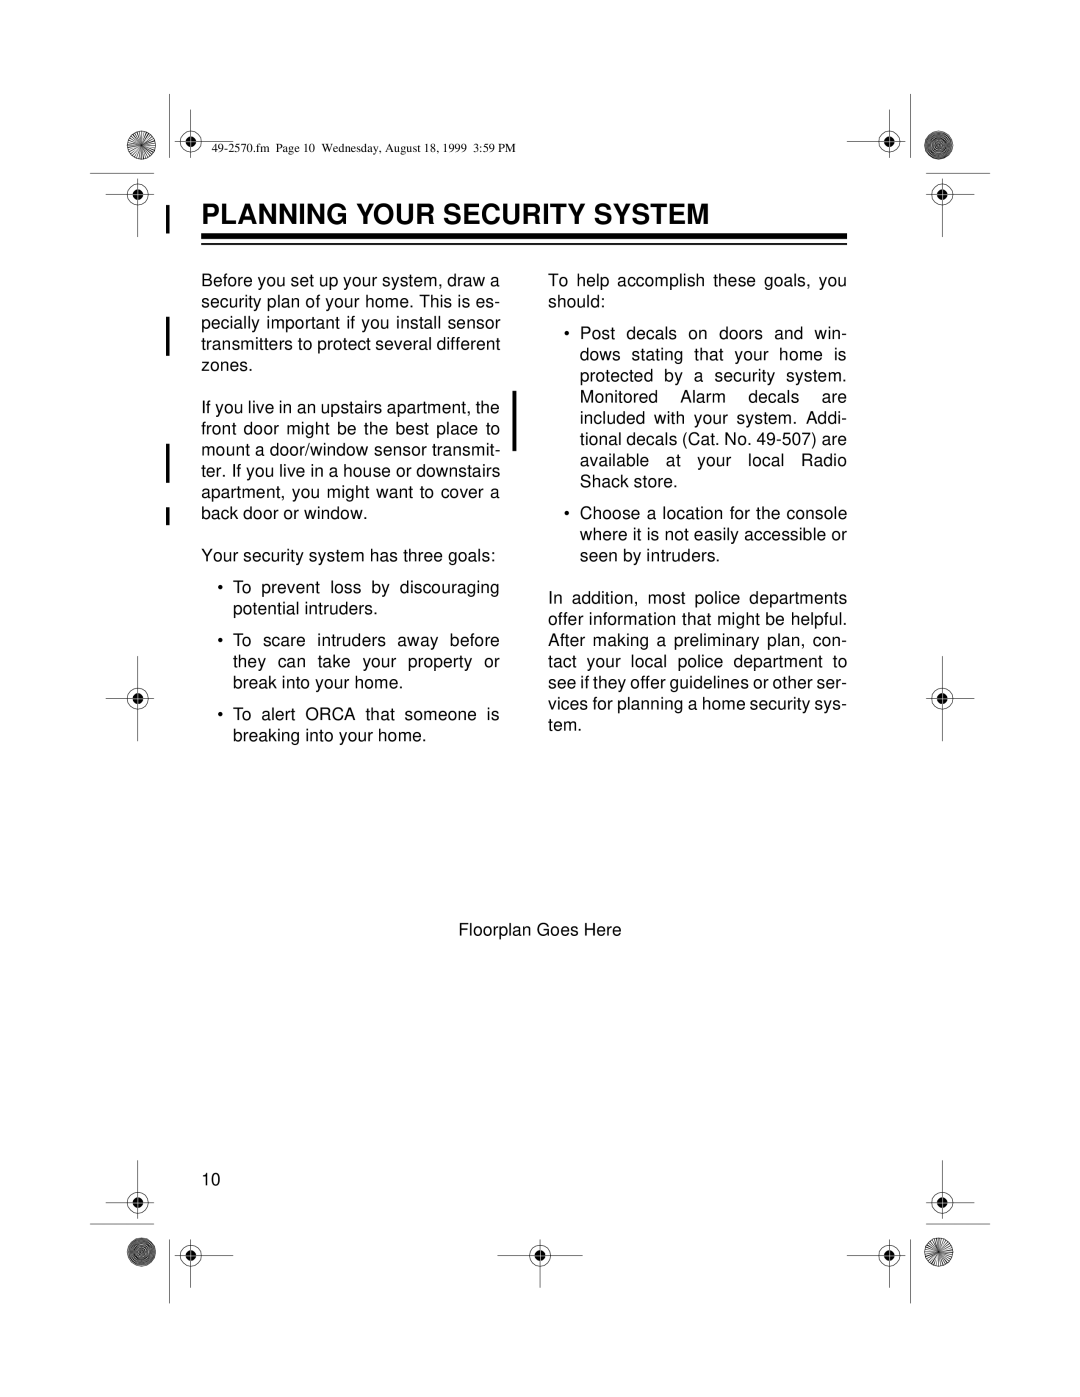 Radio Shack 49-2570 owner manual Planning Your Security System 